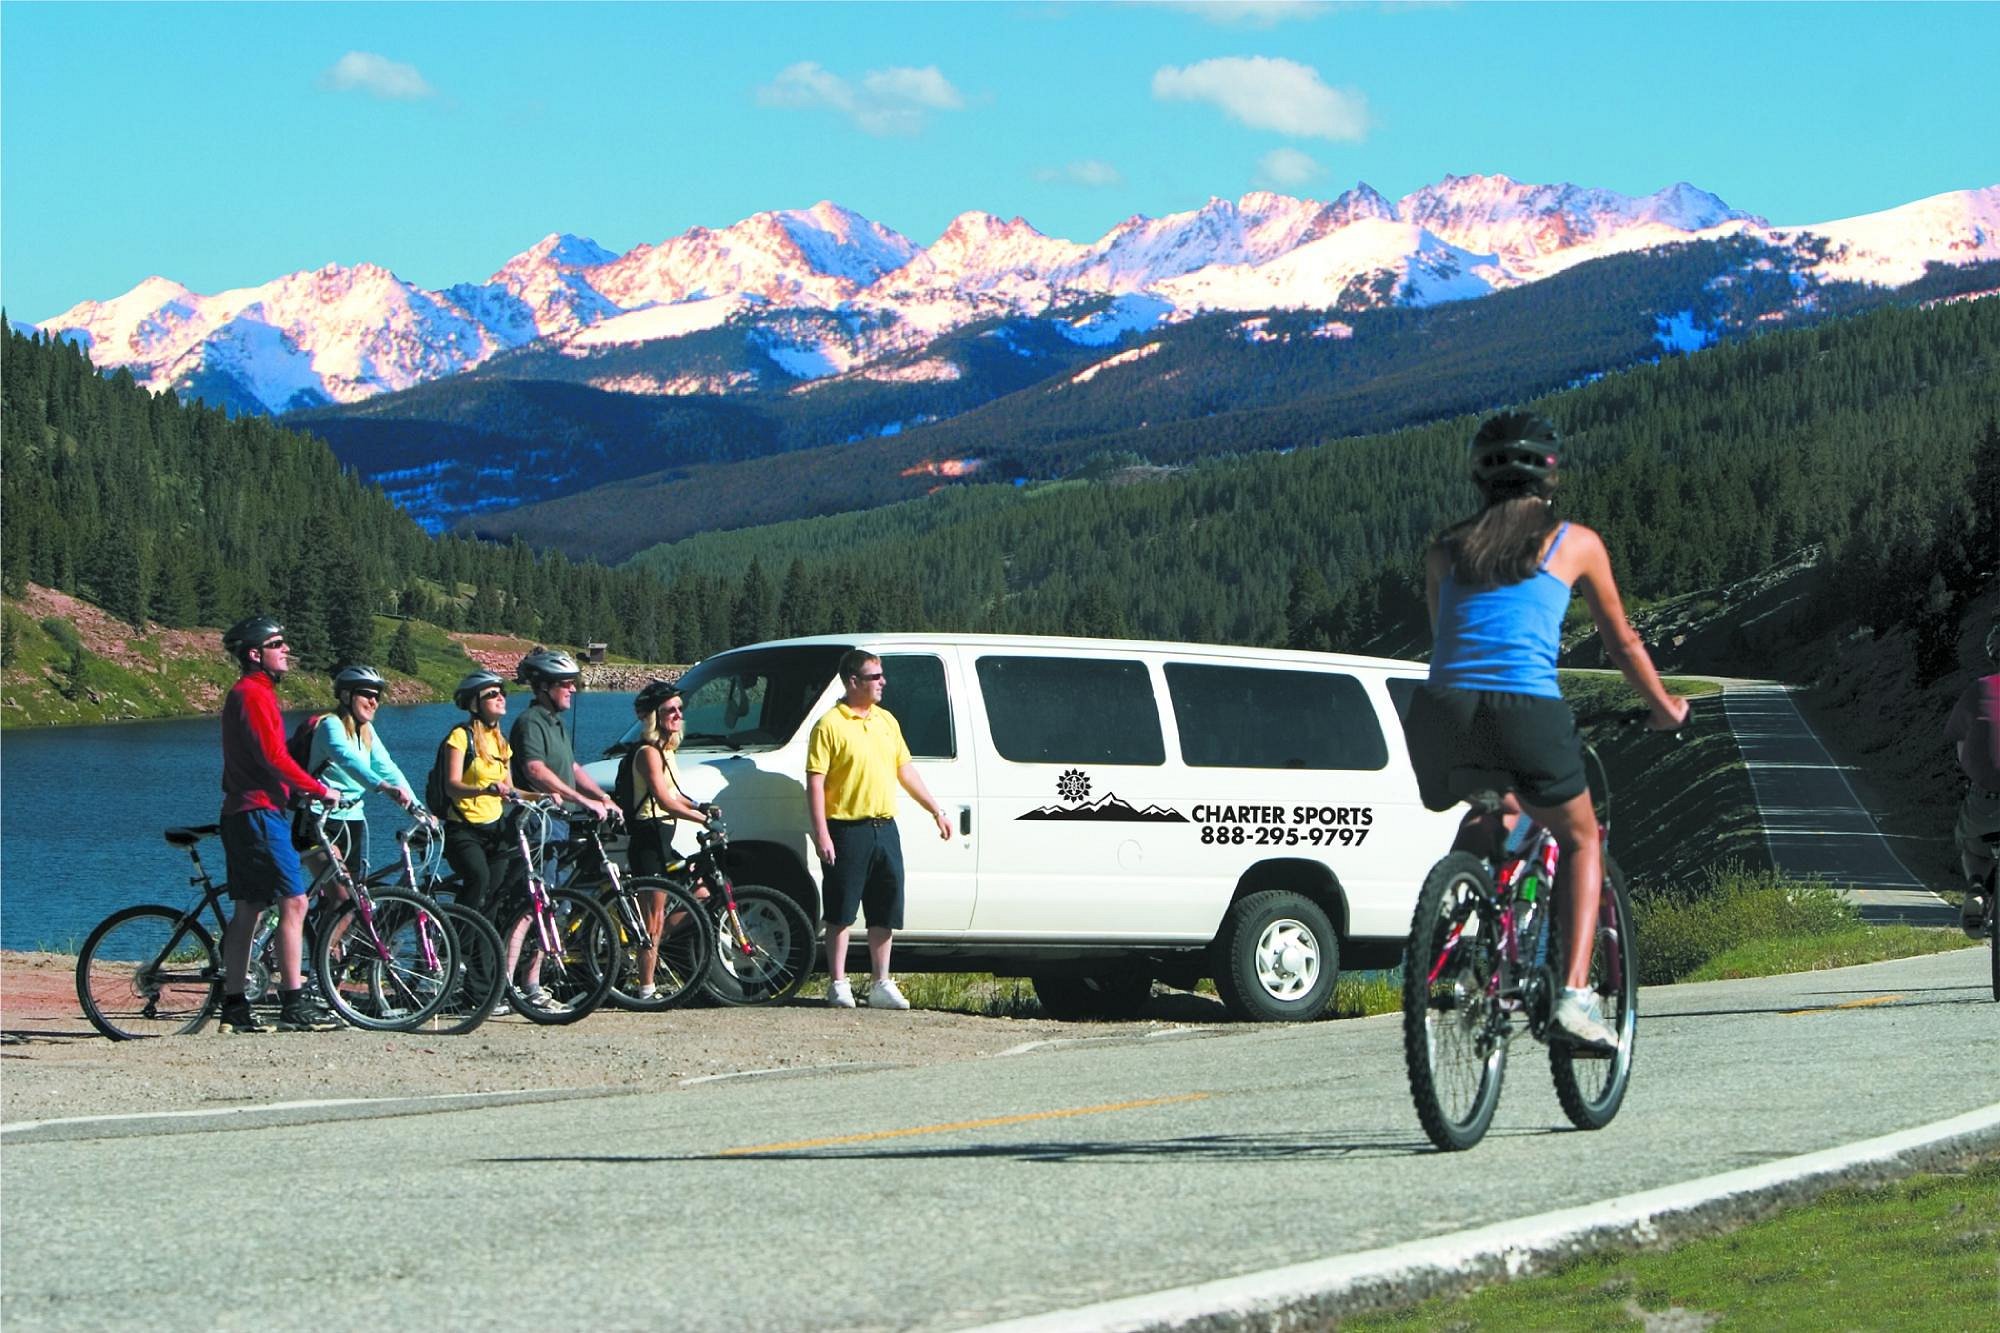 Charter Sports Vail Pass Bike Tour All You Need to Know BEFORE You Go